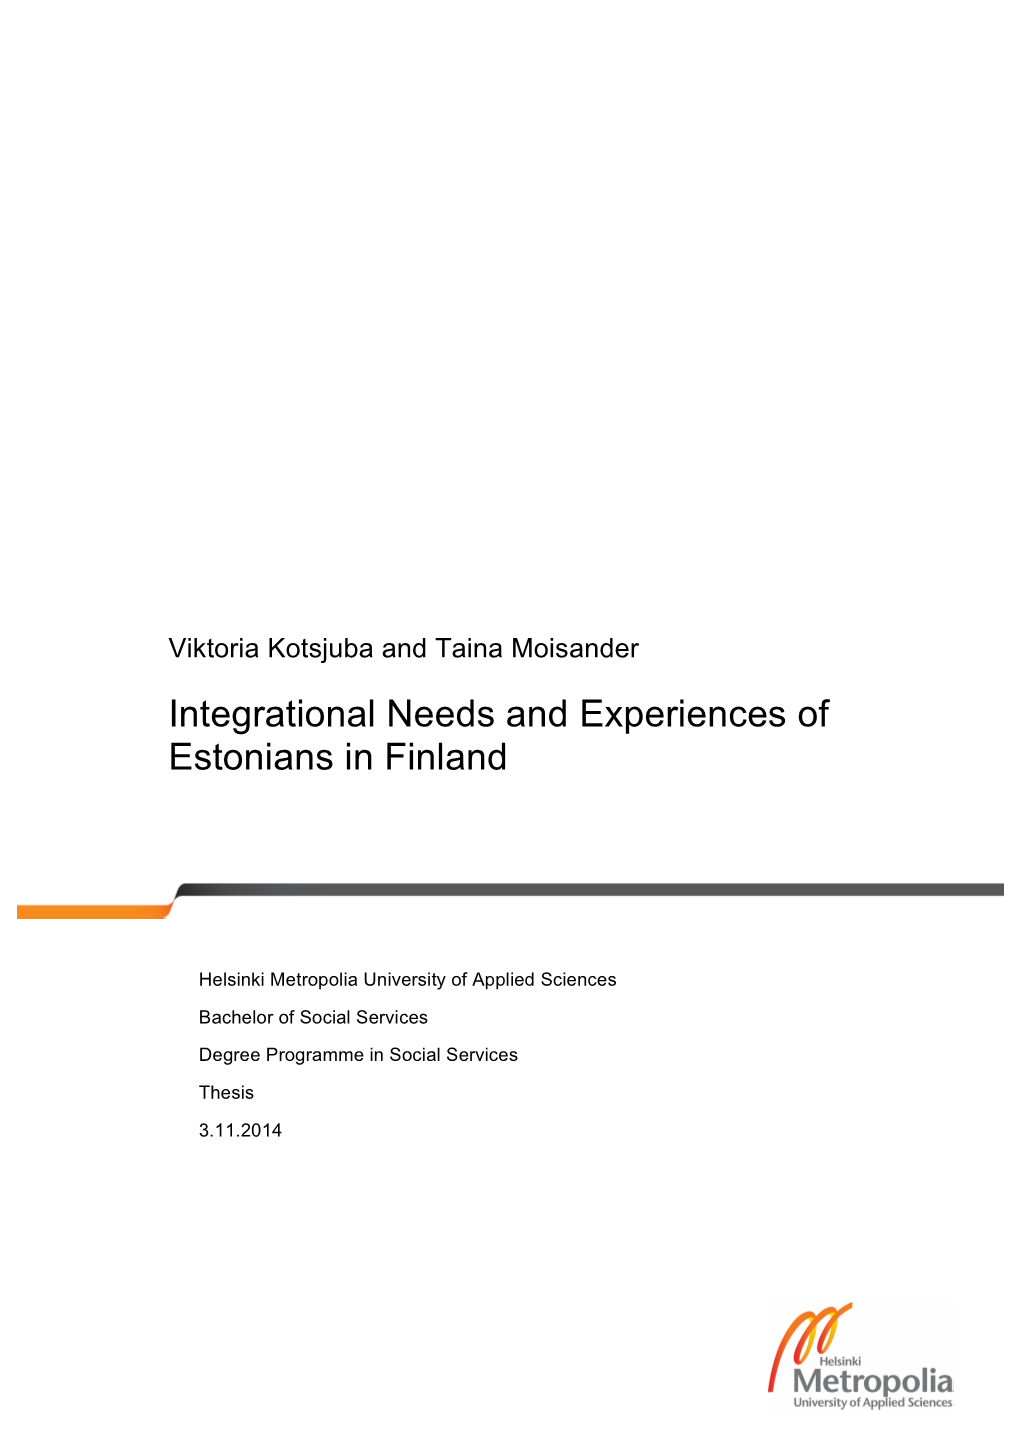 Integrational Needs and Experiences of Estonians in Finland